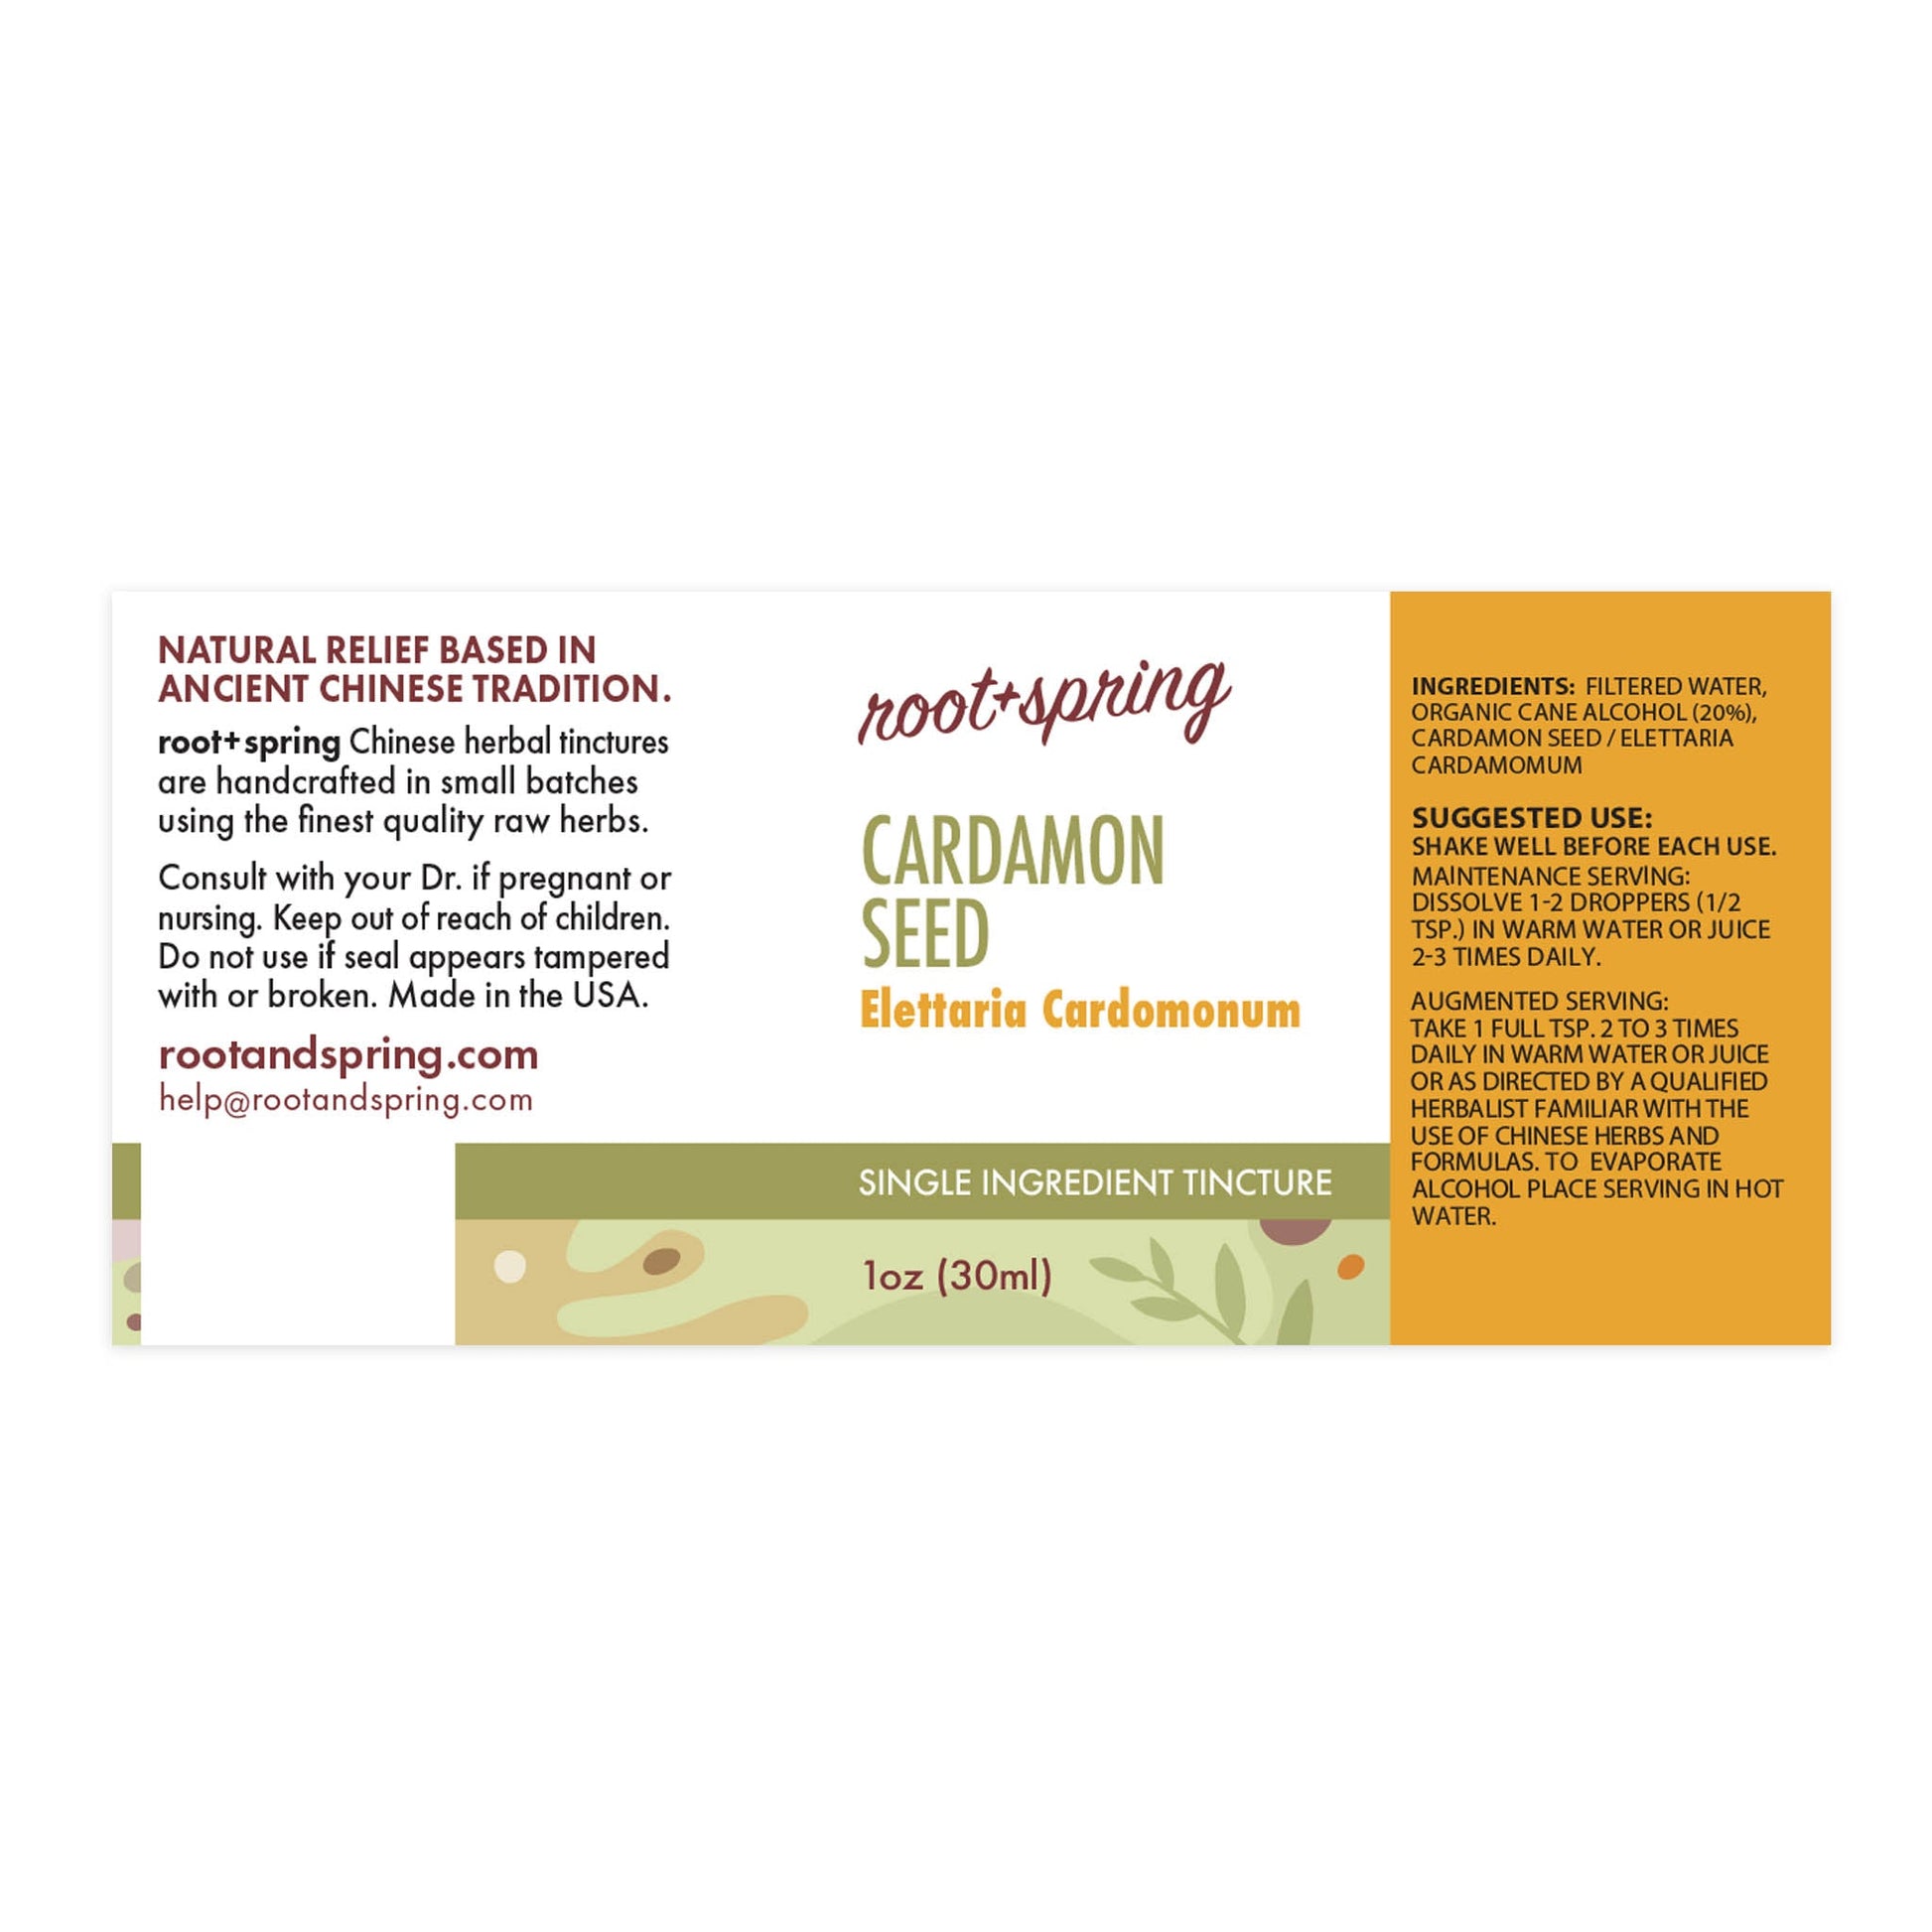 Label of Cardamom Seed (Elettaria Cardomomum) - Herbal Tincture by root + spring